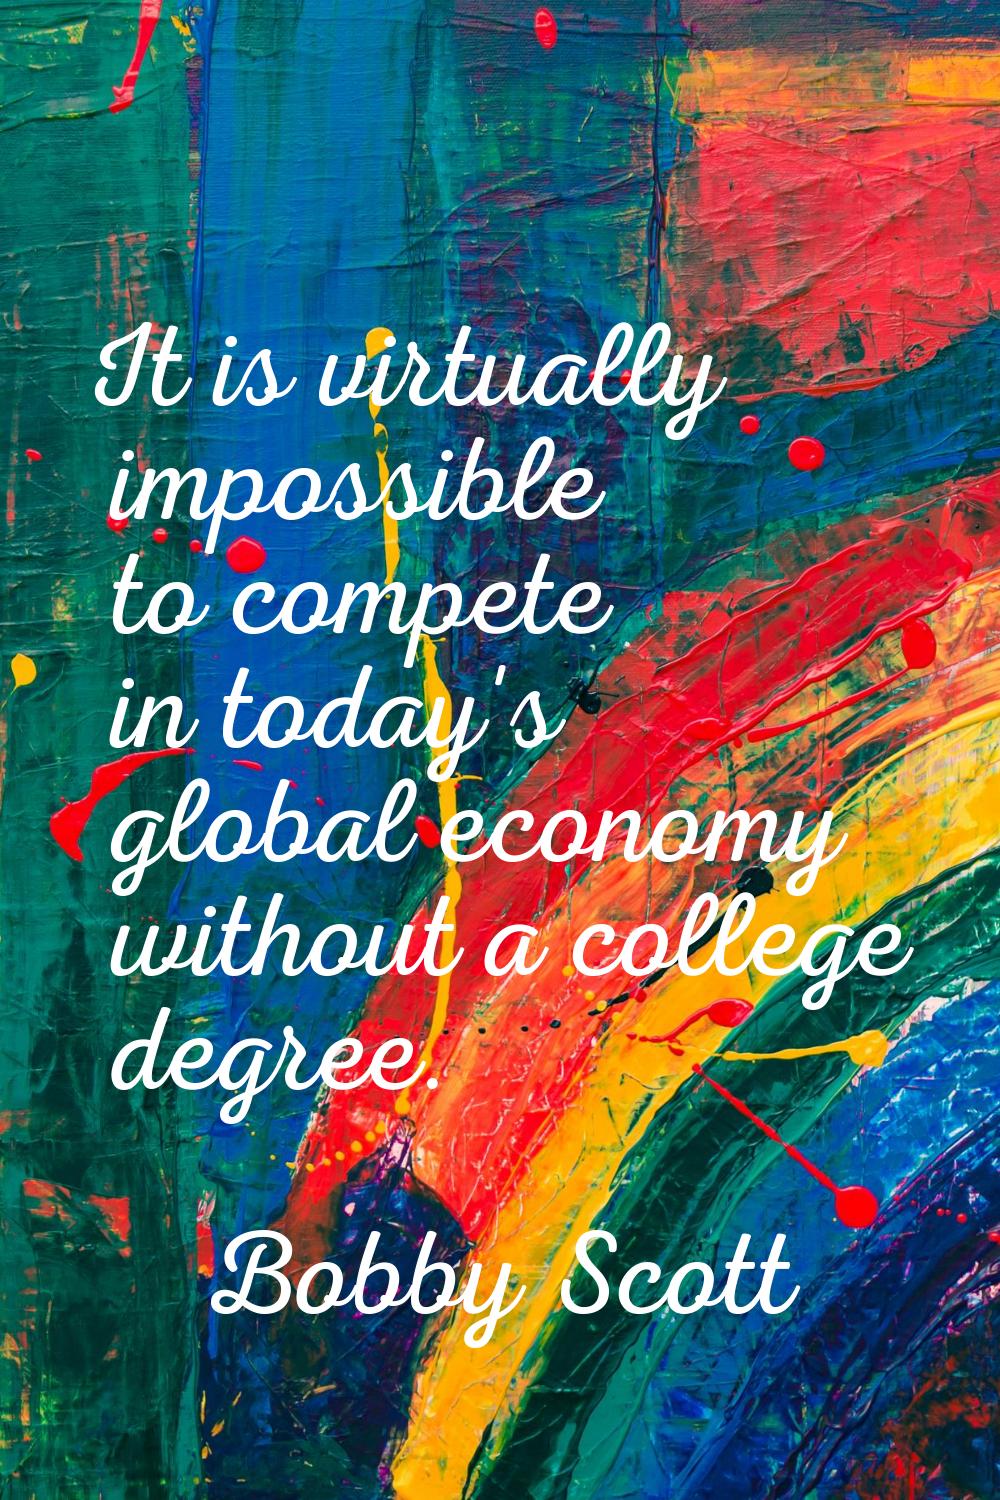 It is virtually impossible to compete in today's global economy without a college degree.